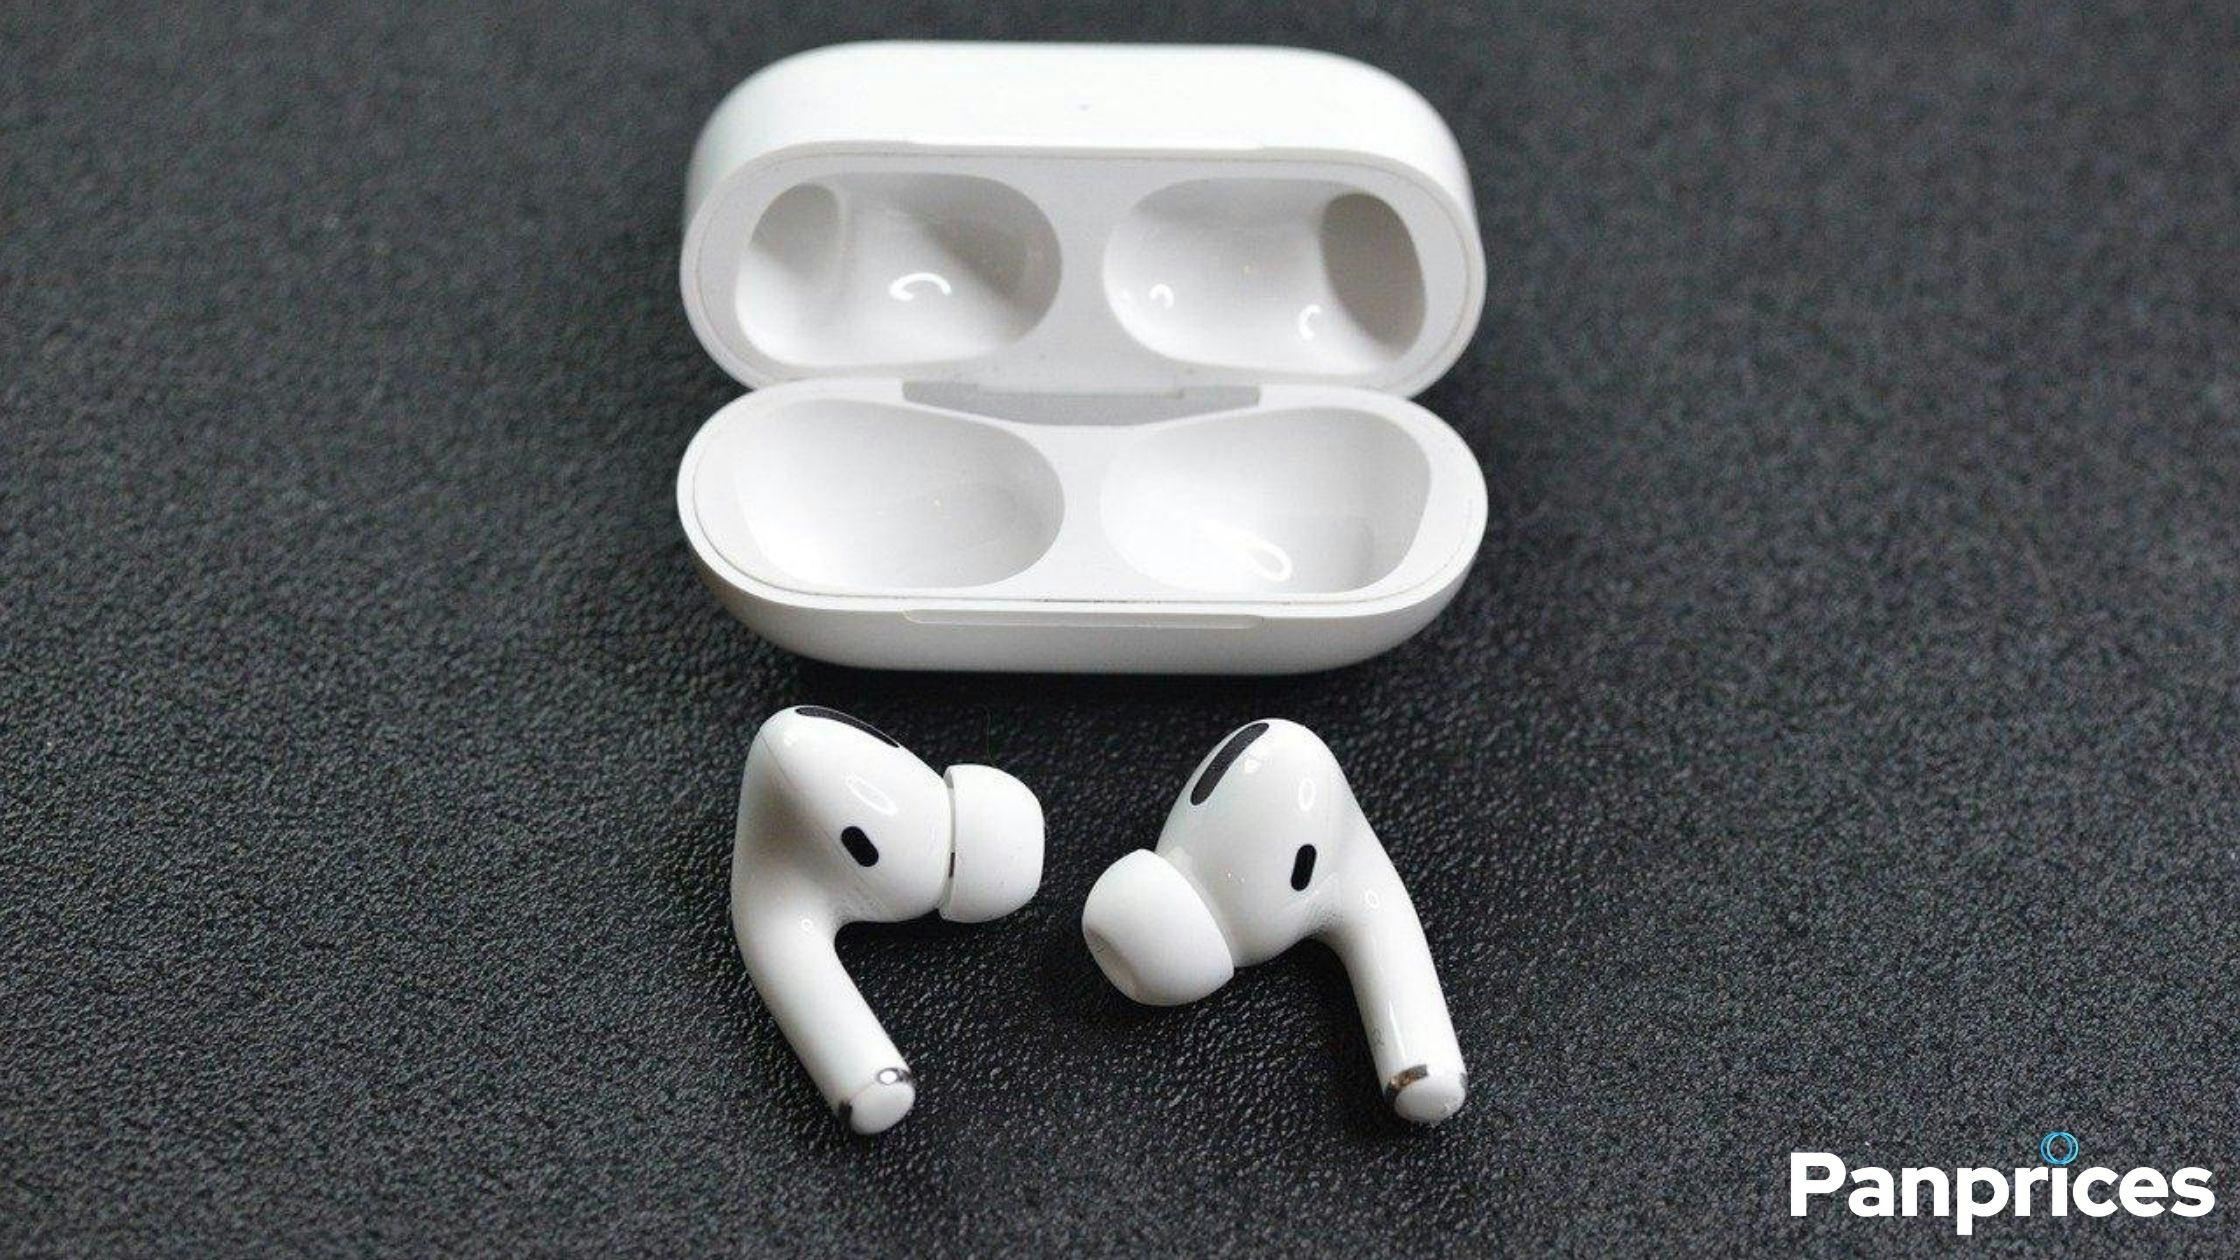 Product of the Week: Apple AirPods Pro